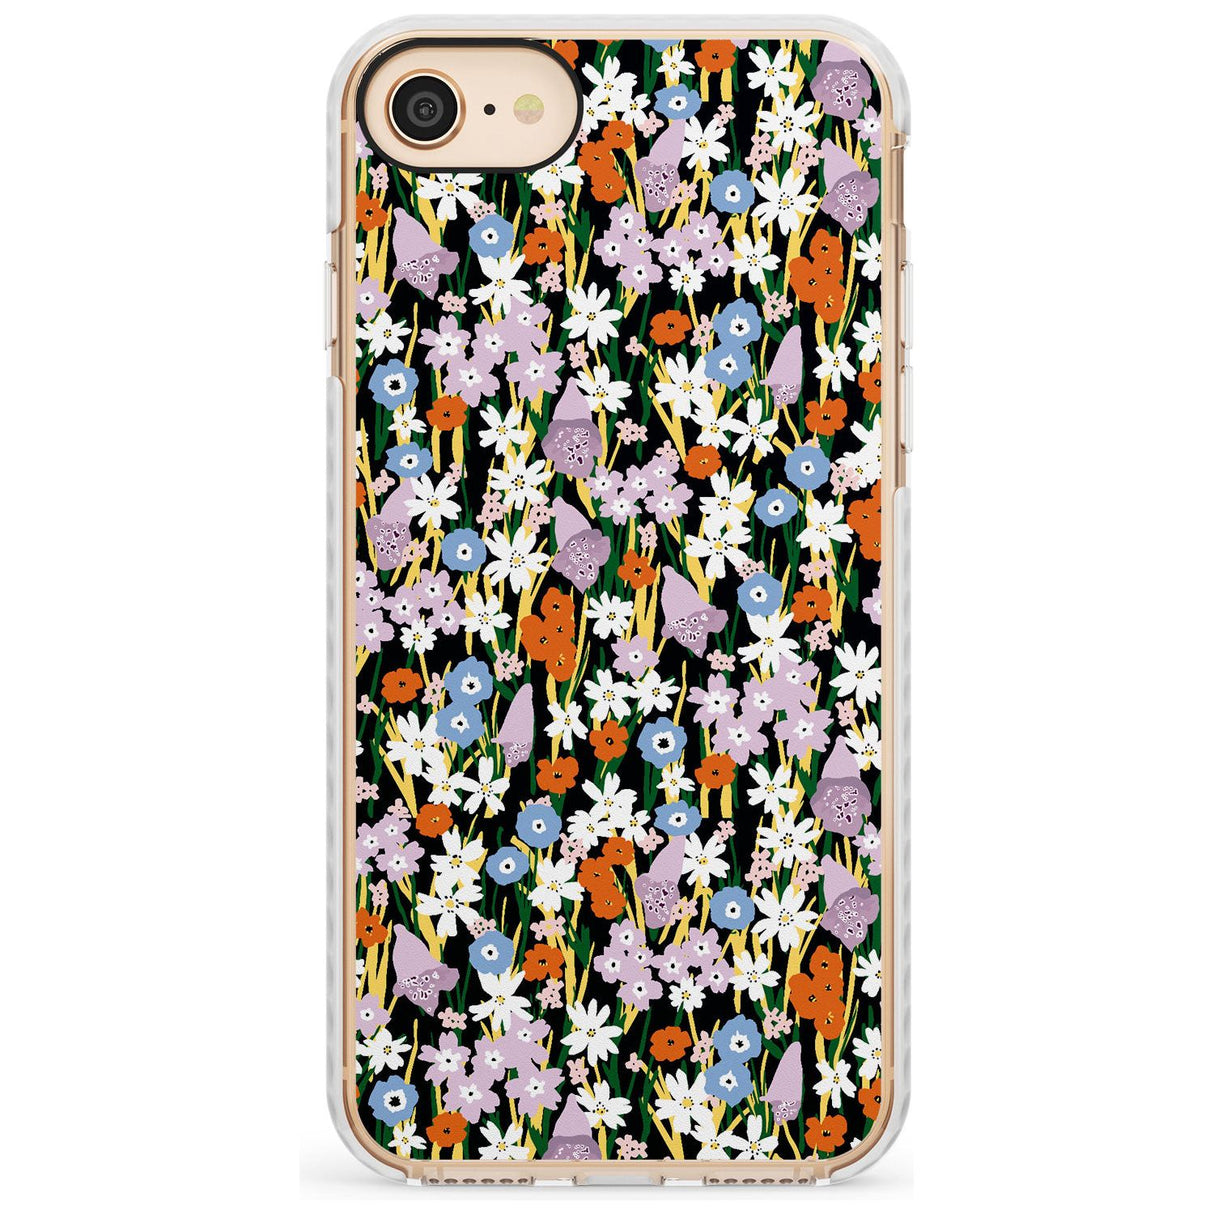 Energetic Floral Mix: Solid Slim TPU Phone Case for iPhone SE 8 7 Plus